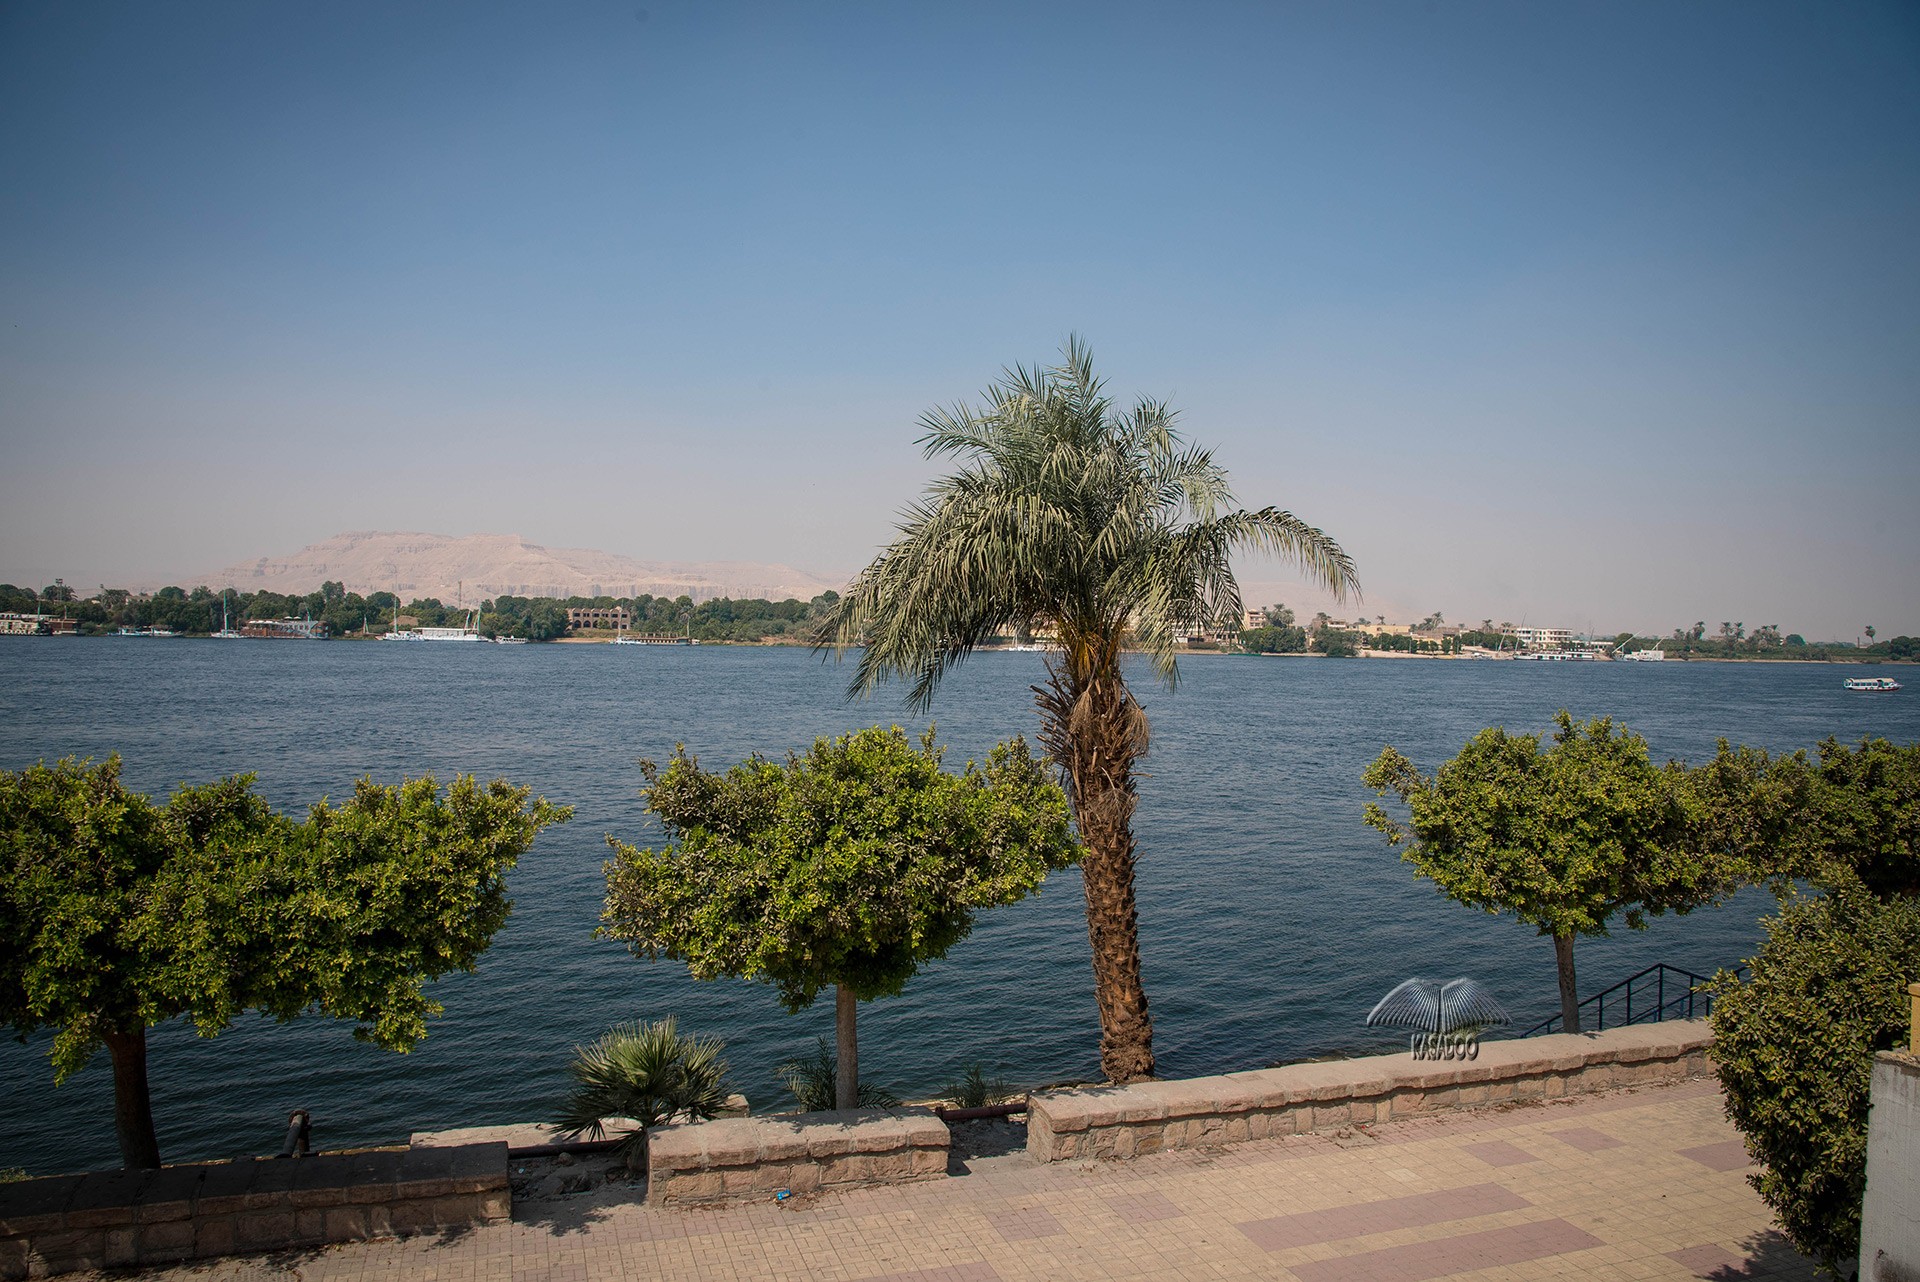 Mighty Nile river